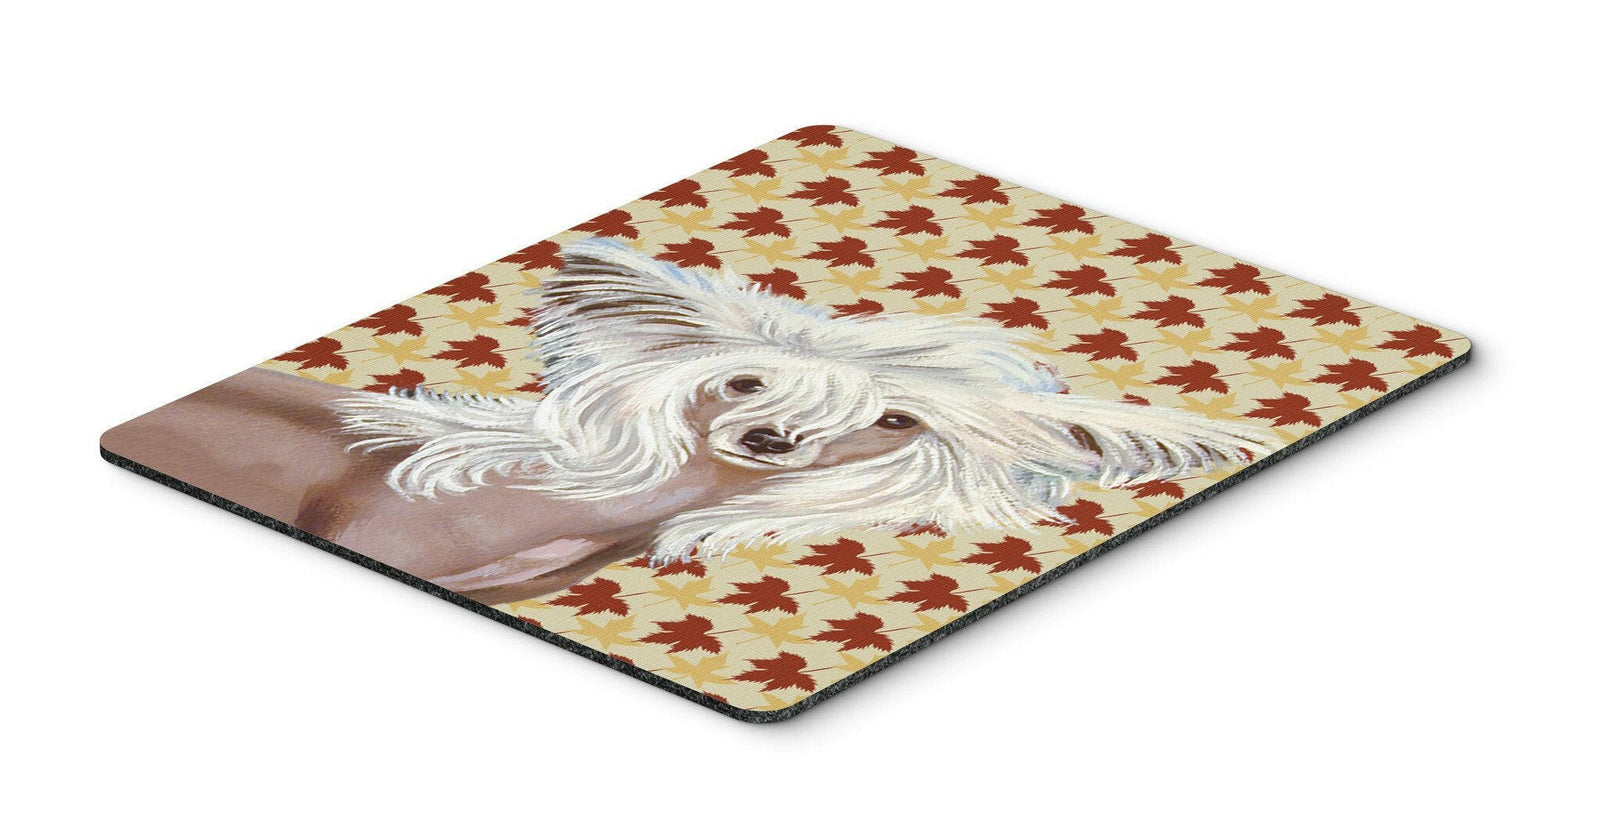 Chinese Crested Fall Leaves Portrait Mouse Pad, Hot Pad or Trivet by Caroline's Treasures